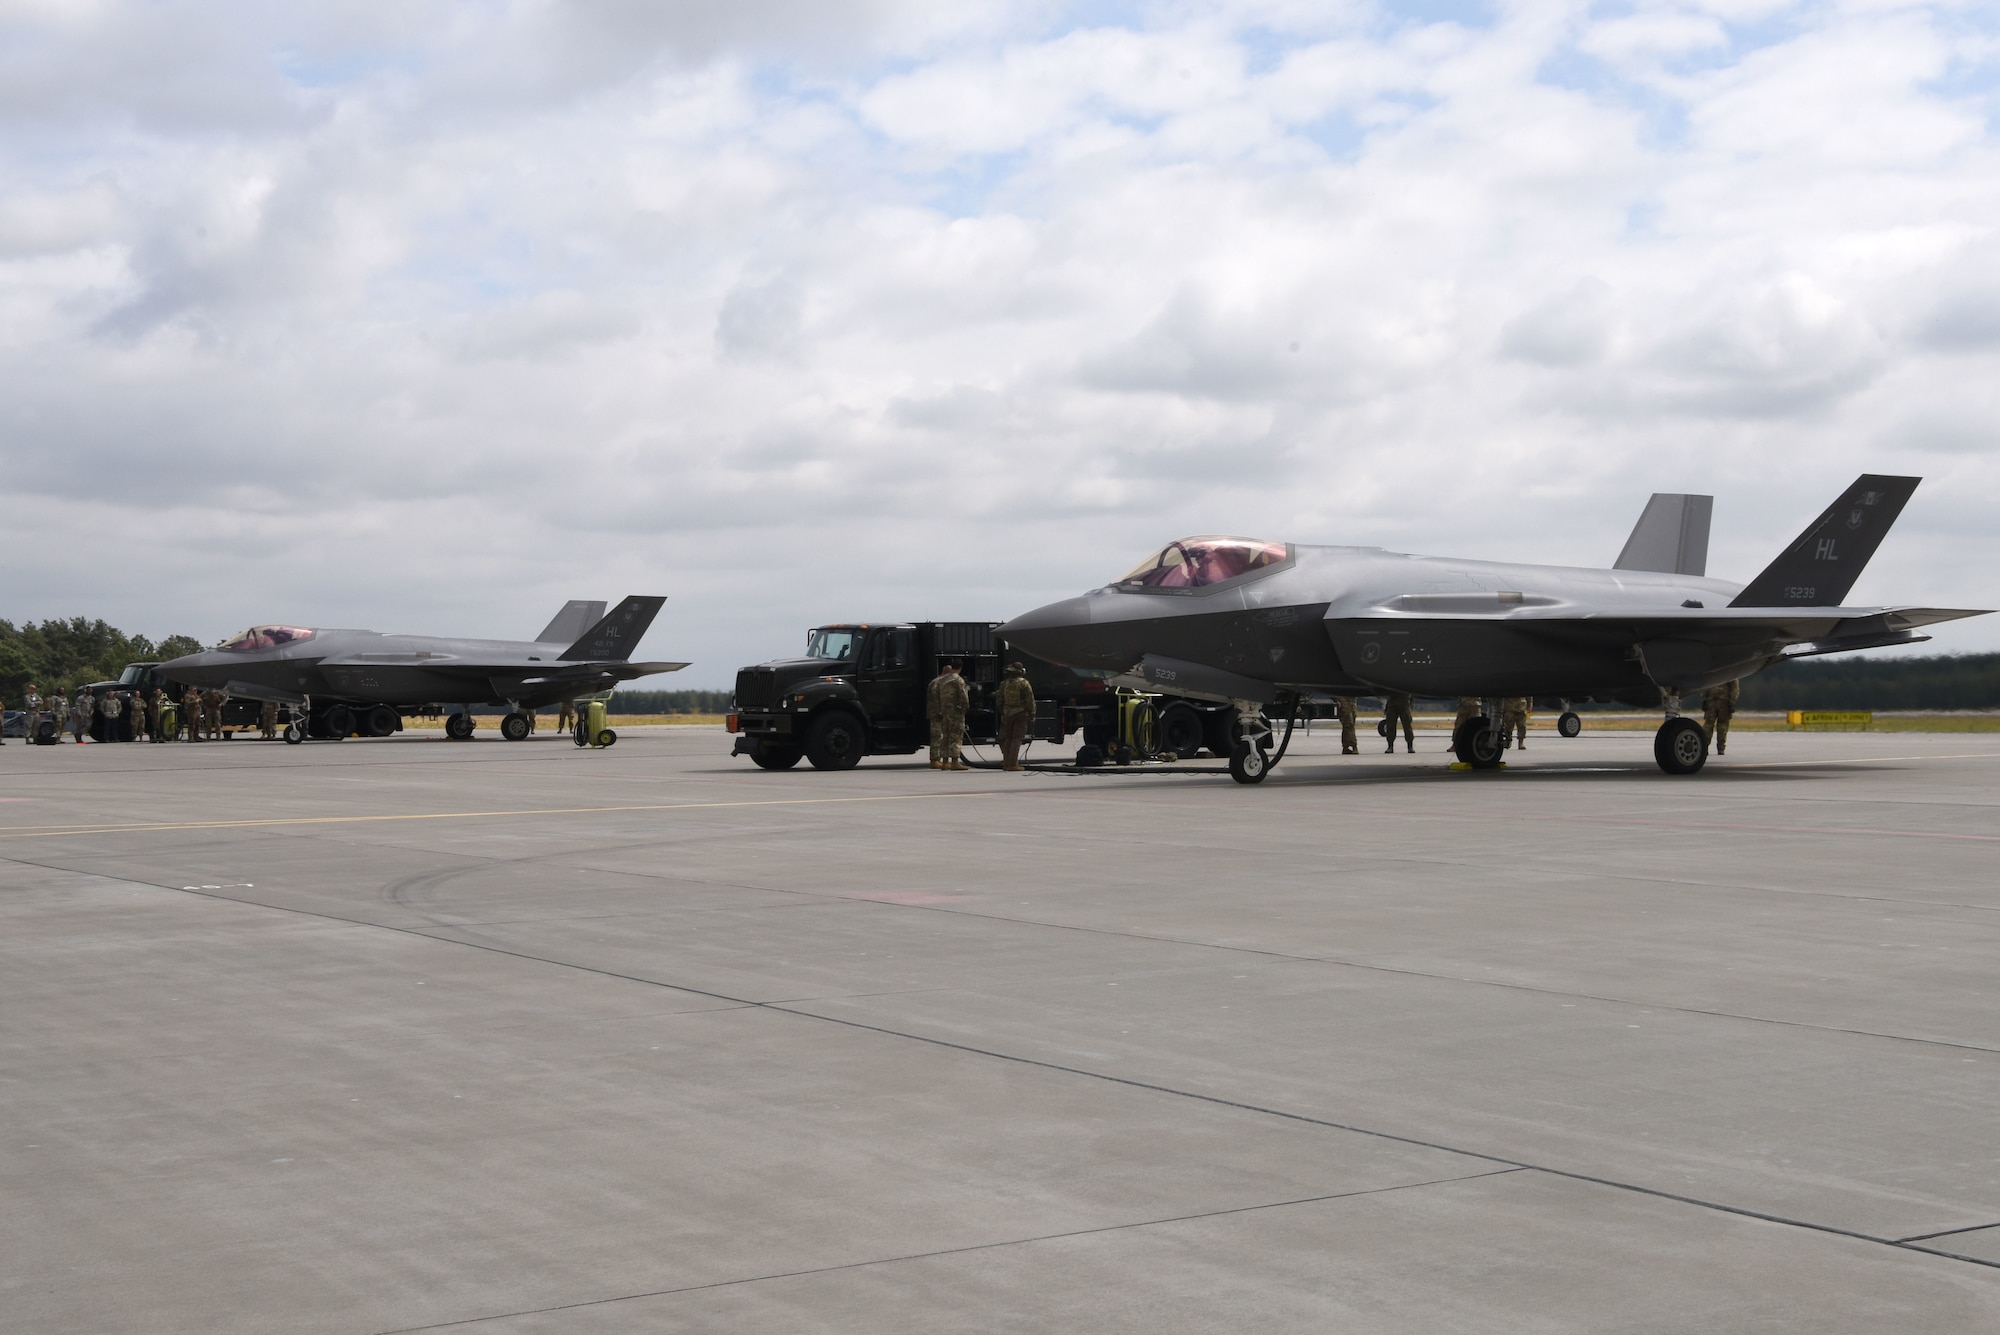 Two U.S. Air Force F-35A Lightning II aircraft, deployed from the 388th and 419th Fighter Wings, Hill Air Force Base, Utah, sit on a runway during Operation Rapid Forge on Powidz Air Base, Poland, July, 16, 2019. This is the first time that U.S. Air Force F-35A Lightning II aircraft have landed in Poland. Rapid Forge is a U.S. Air Forces in Europe-led mission to enhance readiness and test the ability to function at locations other than the main air bases.